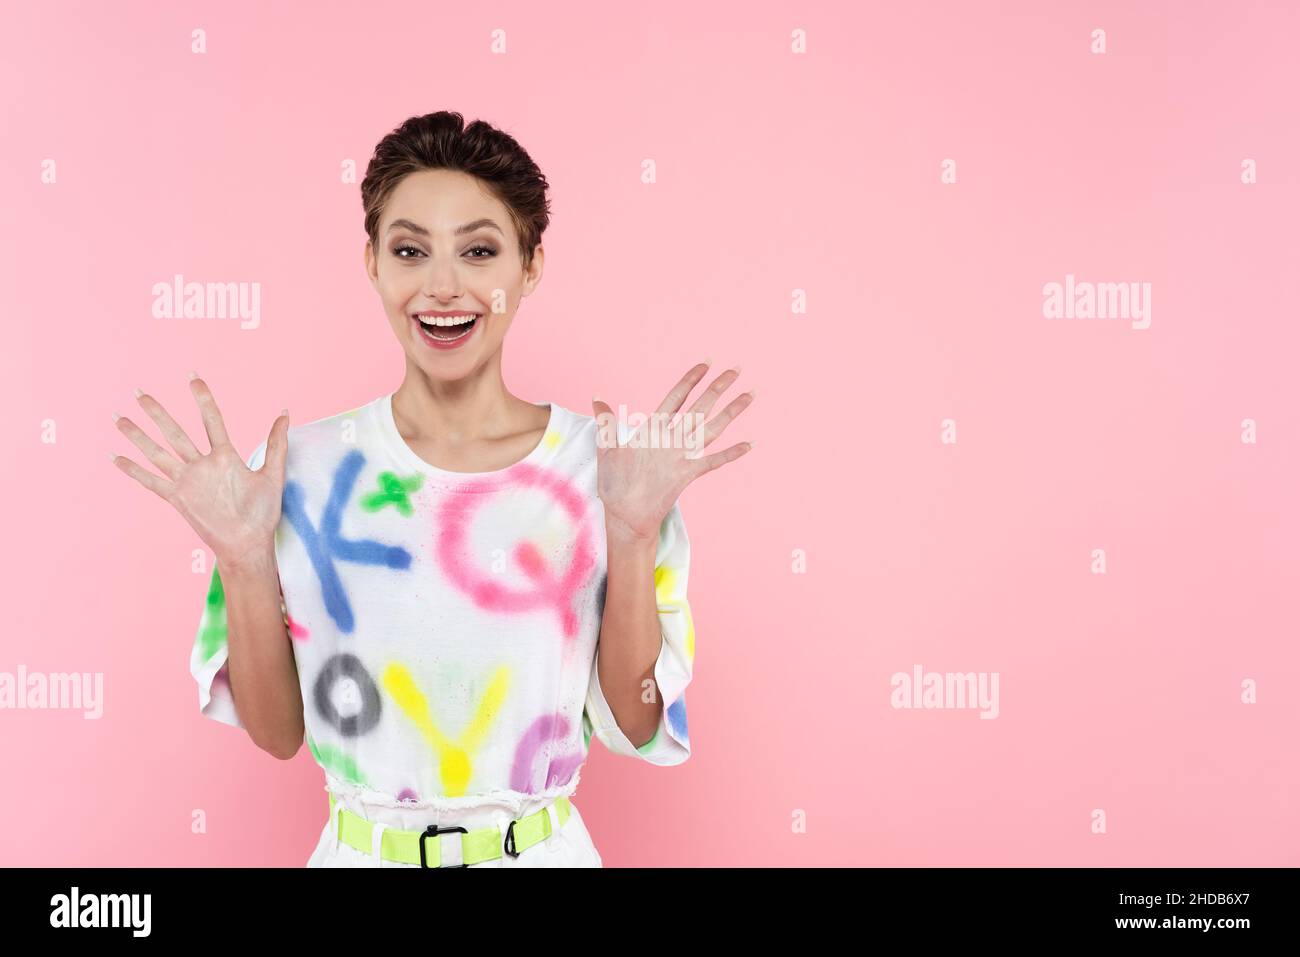 excited and trendy woman waving hands while smiling at camera isolated on pink Stock Photo